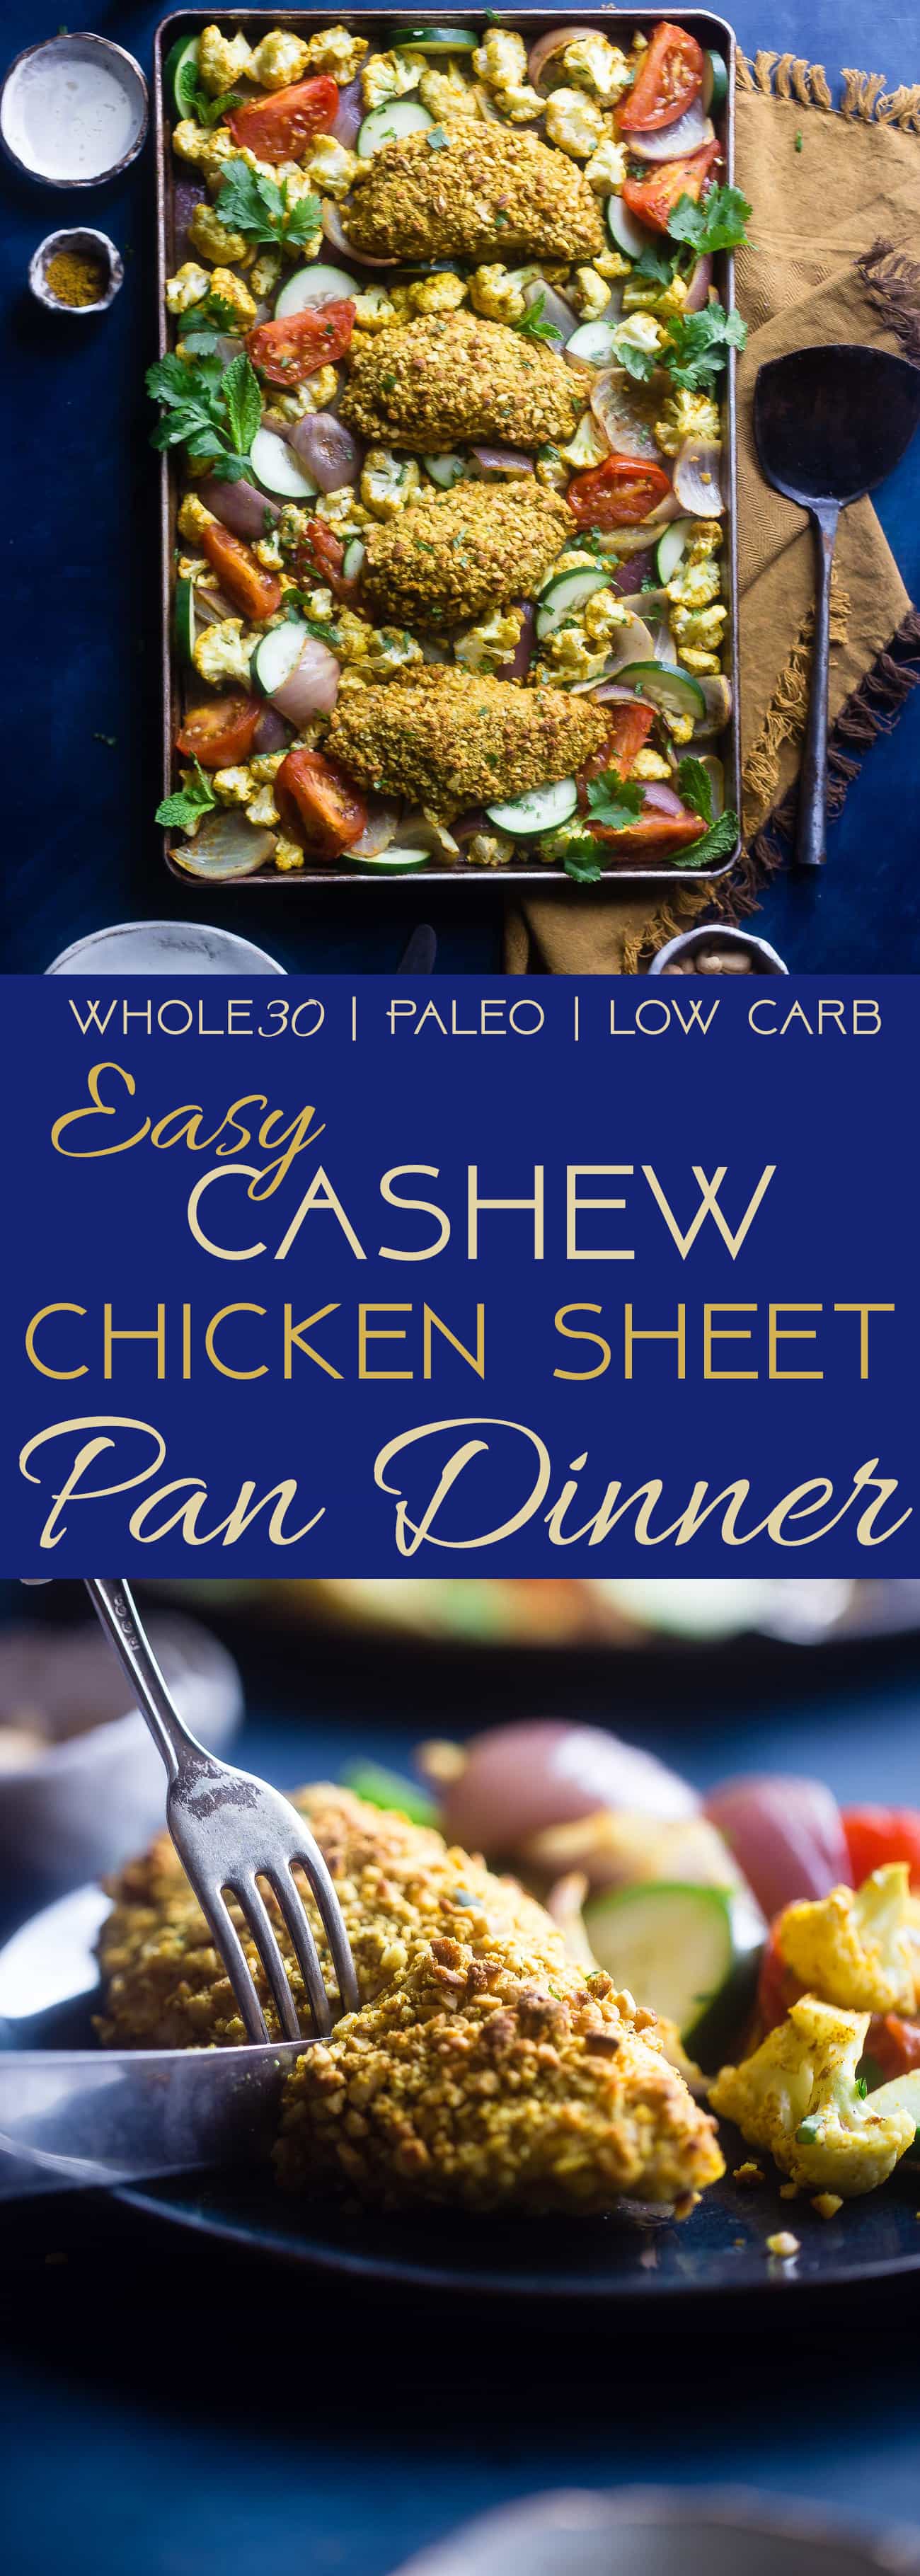 Whole30 Healthy Cashew Chicken Sheet Pan Dinner - This low carb cashew chicken is flavored with curry, and the whole meal is made on one sheet! It's an easy, healthy weeknight meal the whole will love, for under 400 calories! | Foodfaithfitness.com | @FoodFaithFit | easy cashew chicken. keto cashew chicken. sheet pan cashew chicken. best cashew chicken. curry cashew chicken. gluten free cashew chicken. skinny cashew chicken. chicken sheet pan dinner. easy meals. whole30 sheet pan dinner. sheet pan dinner recipes